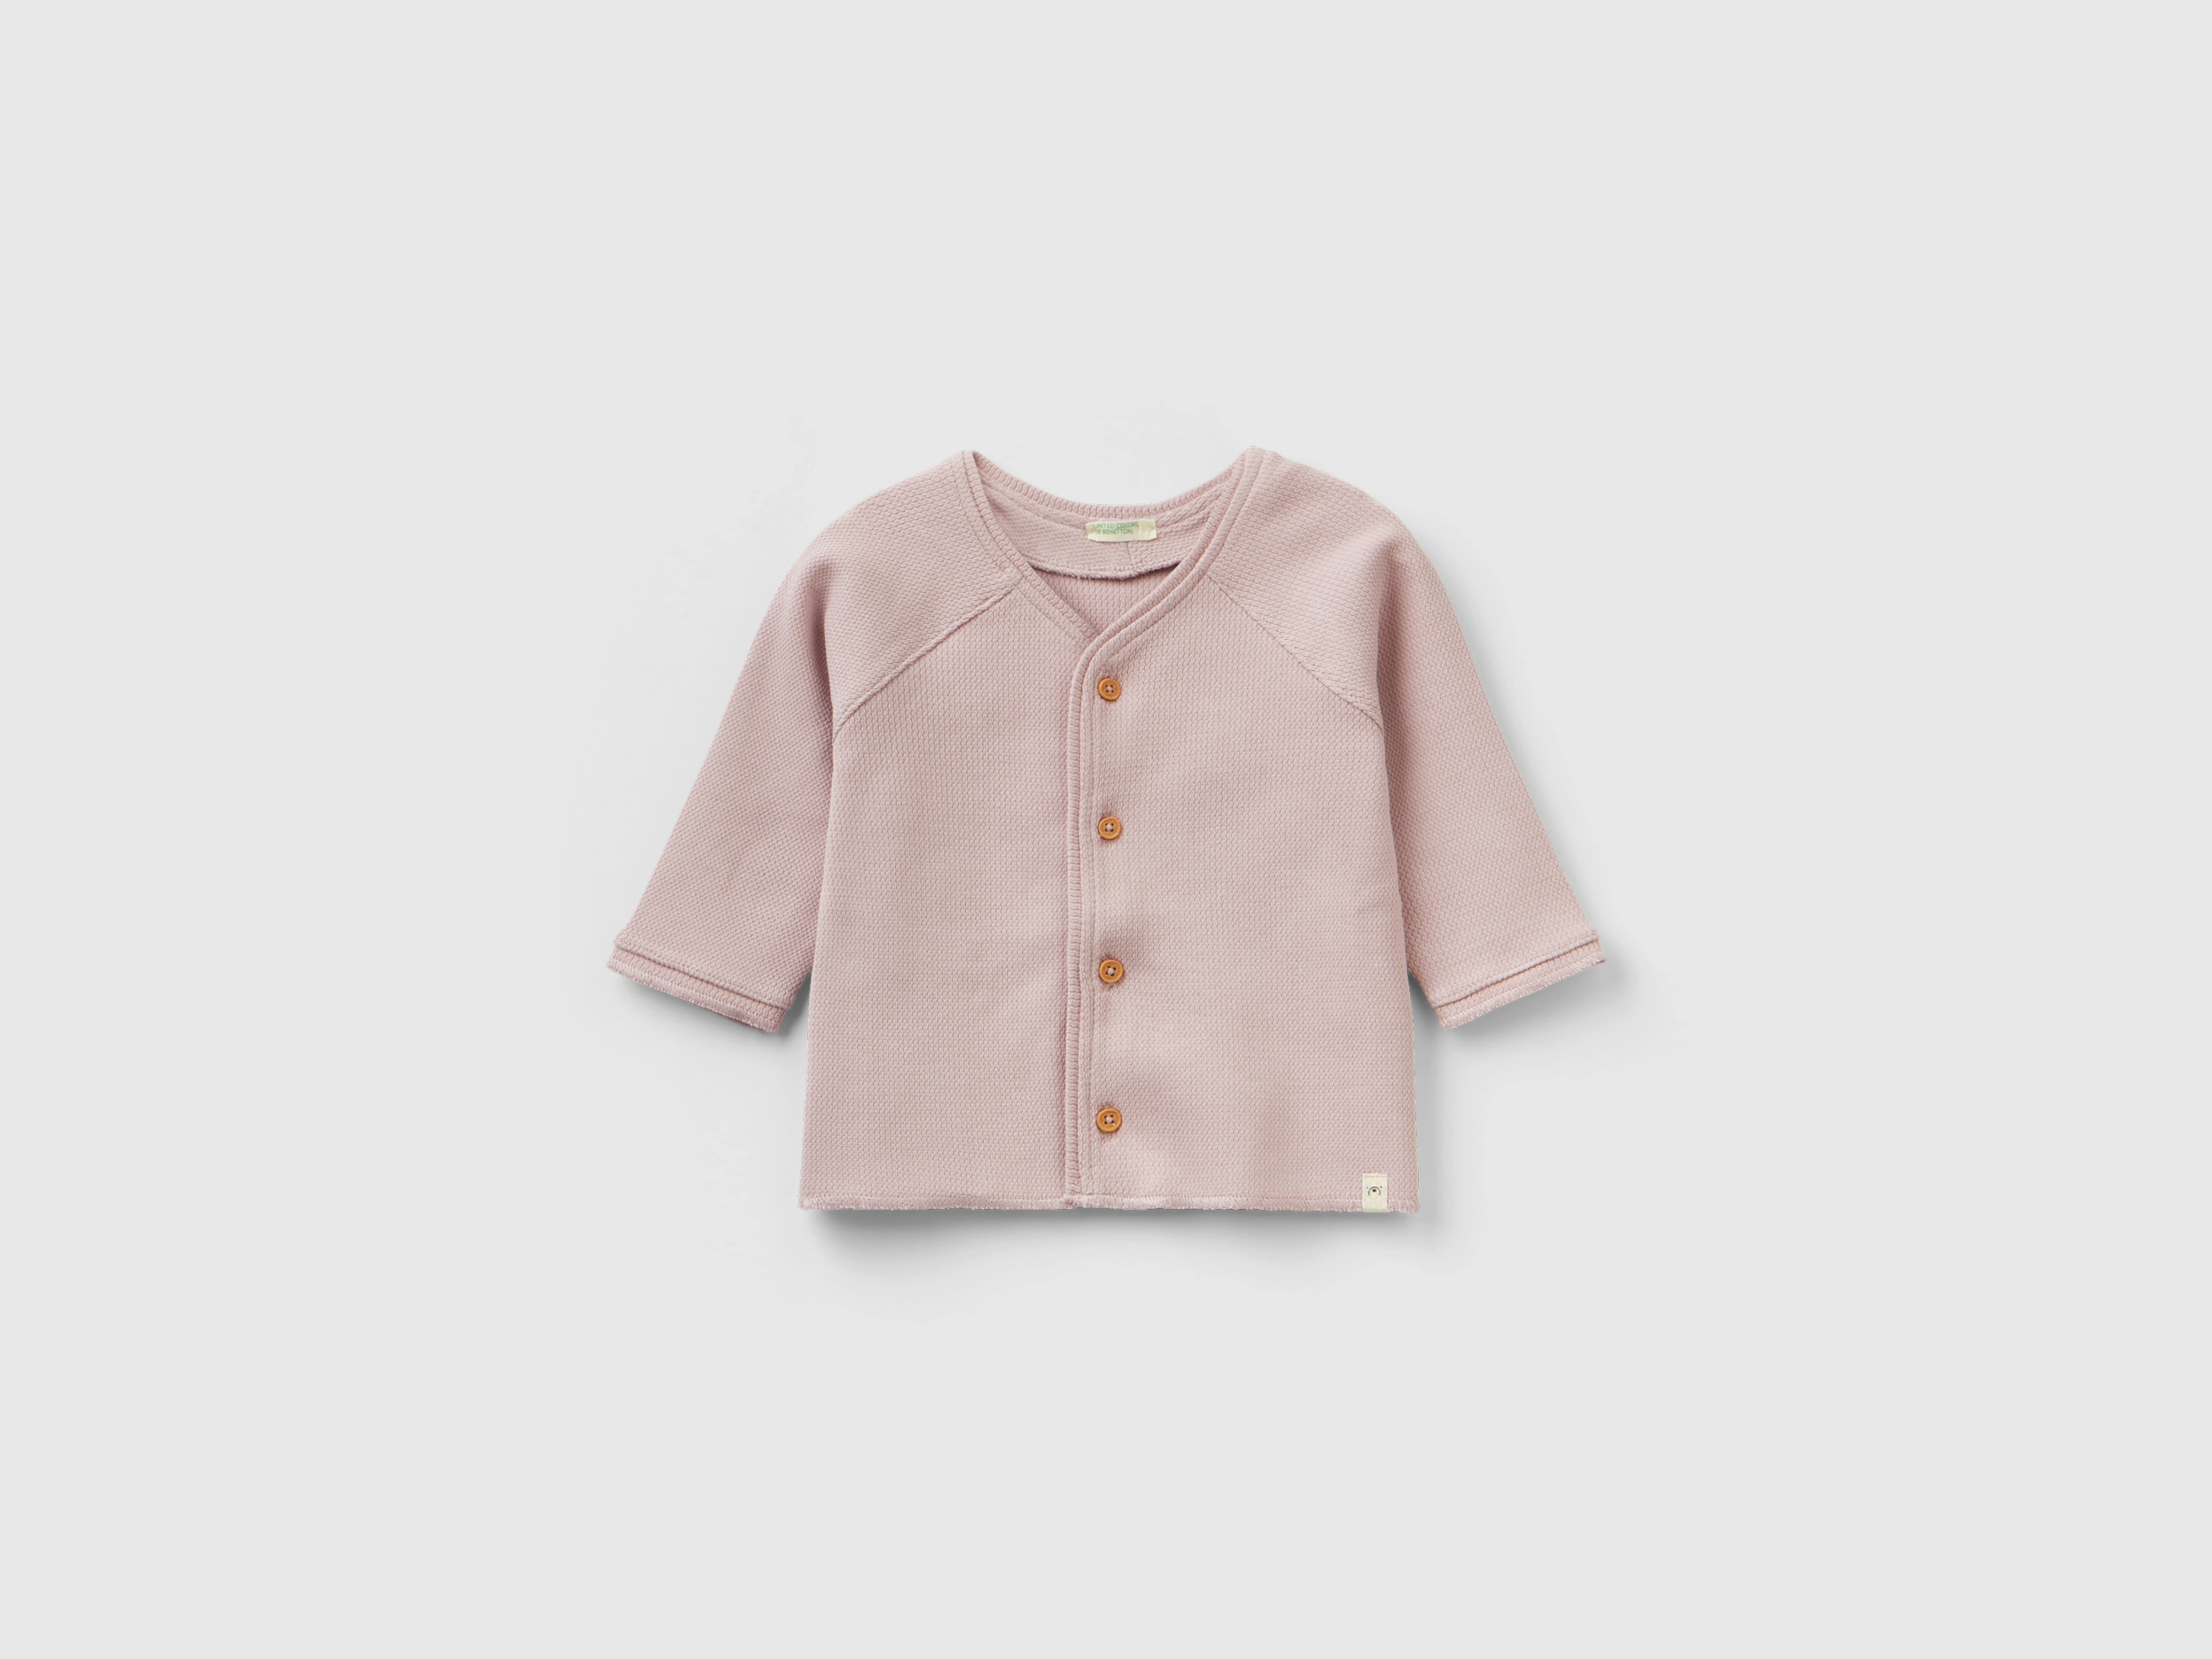 Benetton, Sweatshirt With Buttons, size 0-1, Pink, Kids